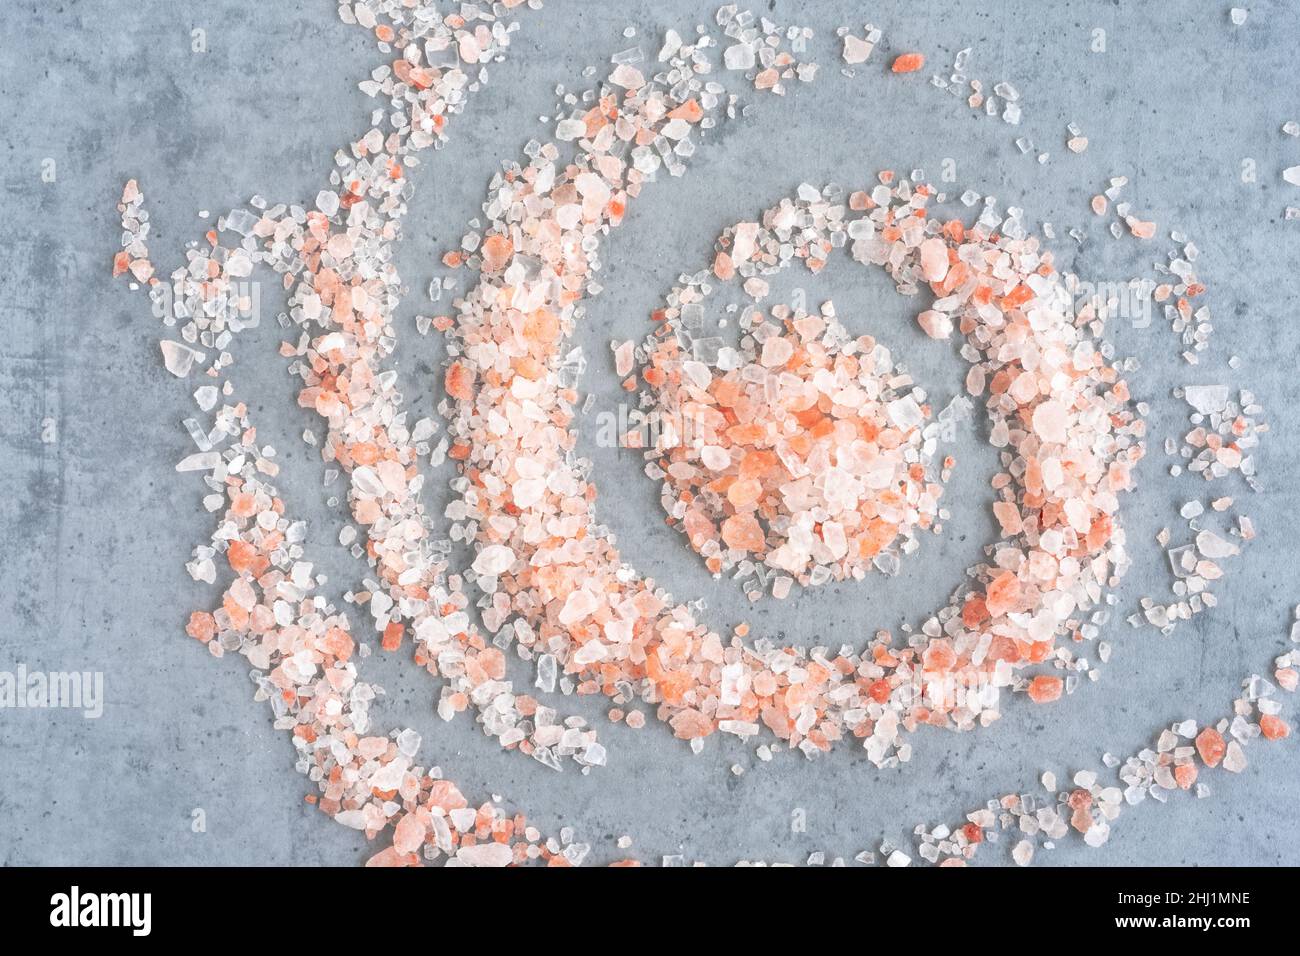 Himalayan salt scattered in a spiral shape on a gray background, top view Stock Photo